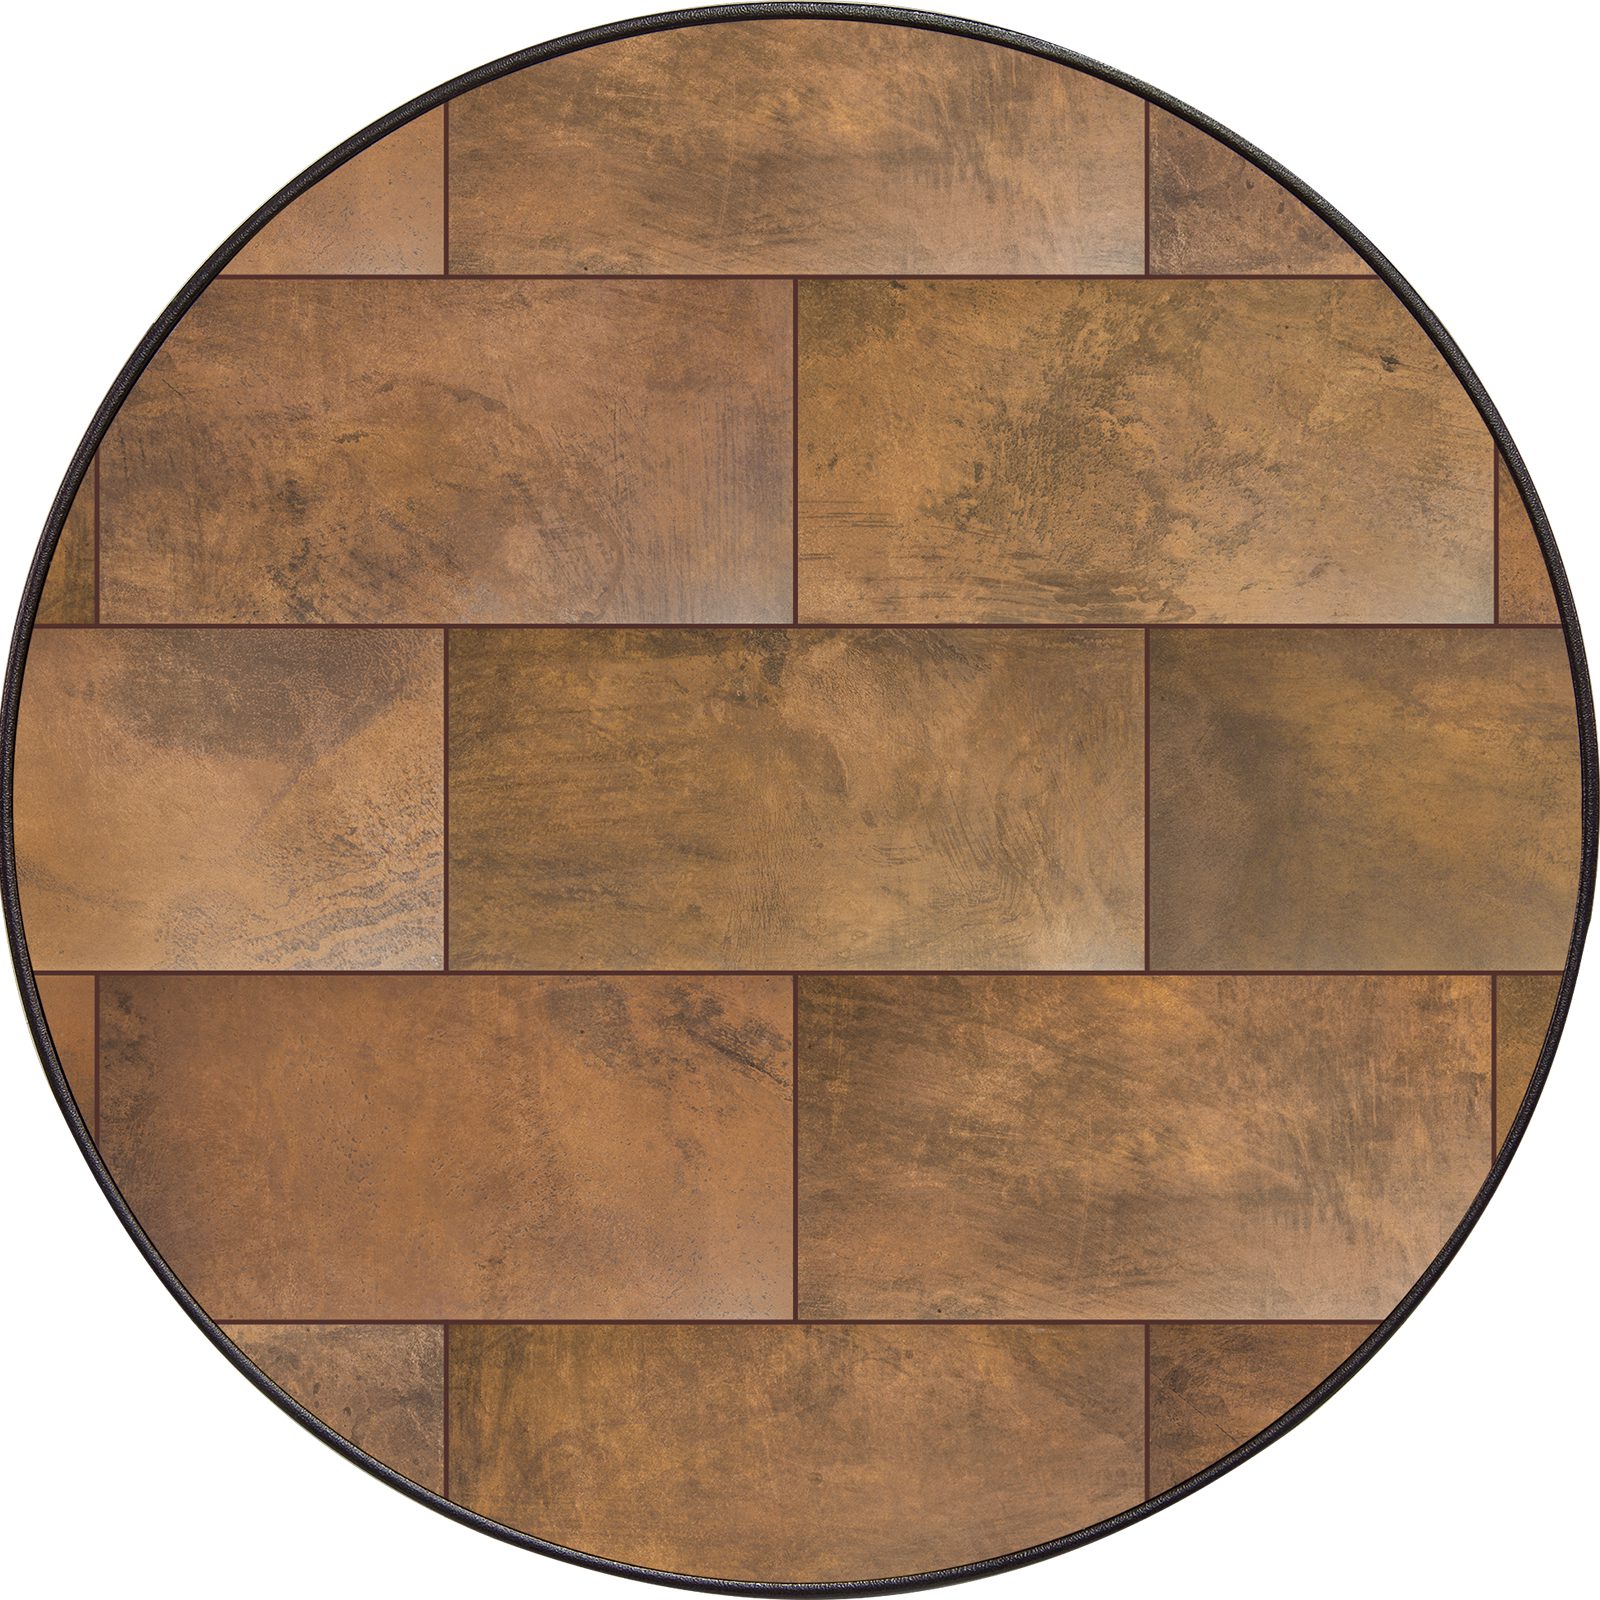 54" Round City Top - Porcelain Table Tops - City Series 25